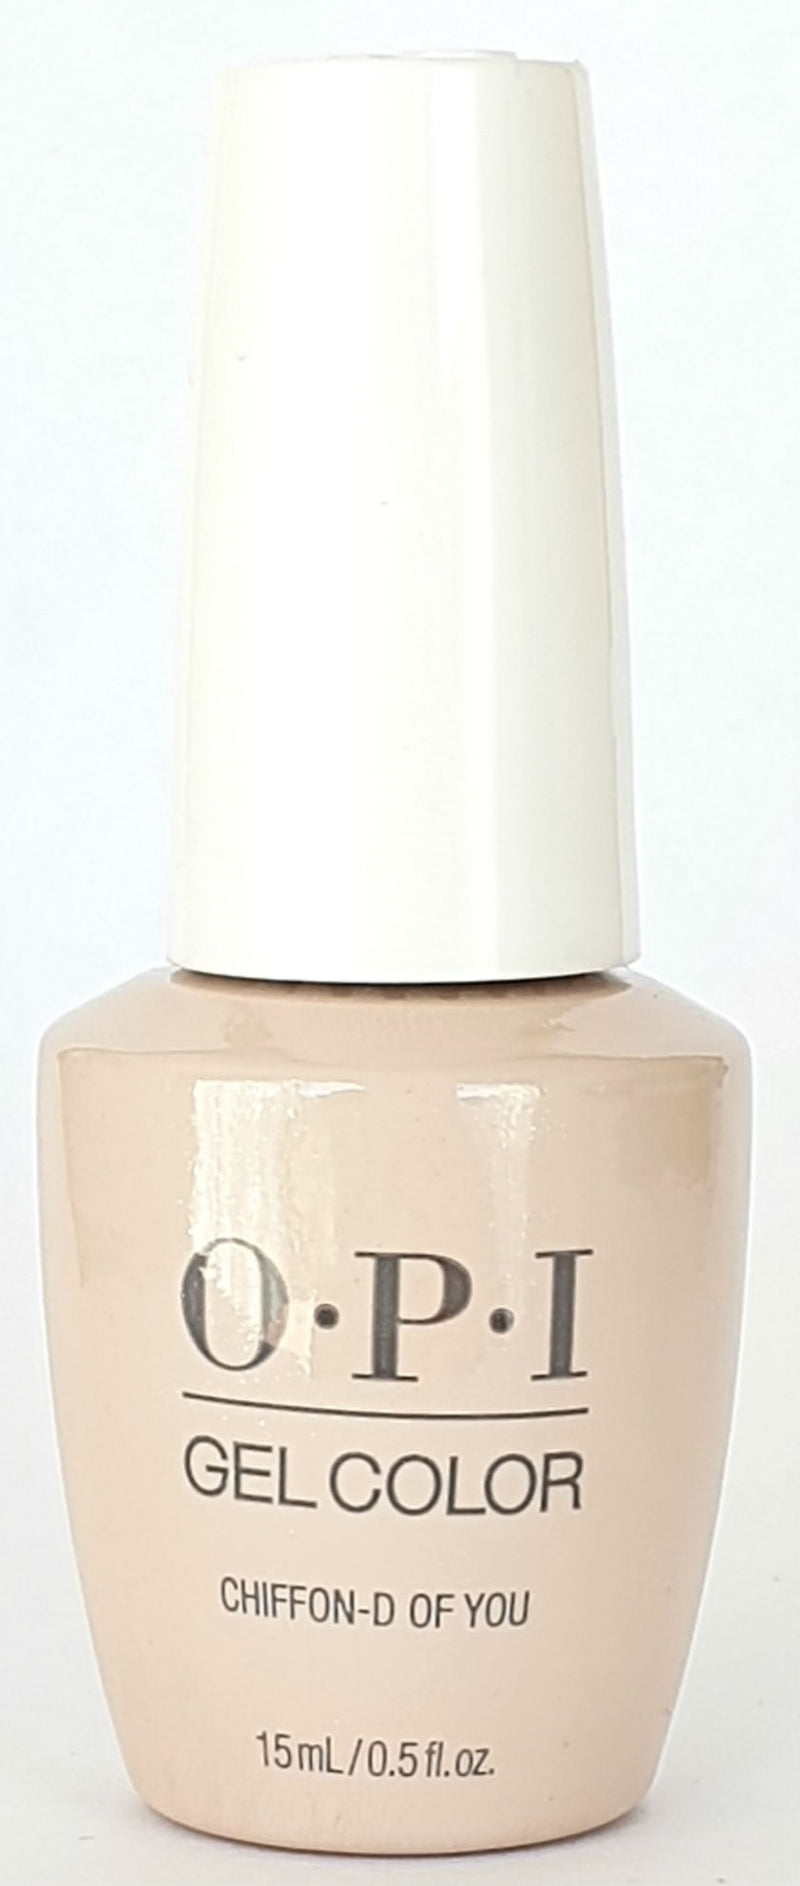 Chiffon-D Of You * OPI Gelcolor